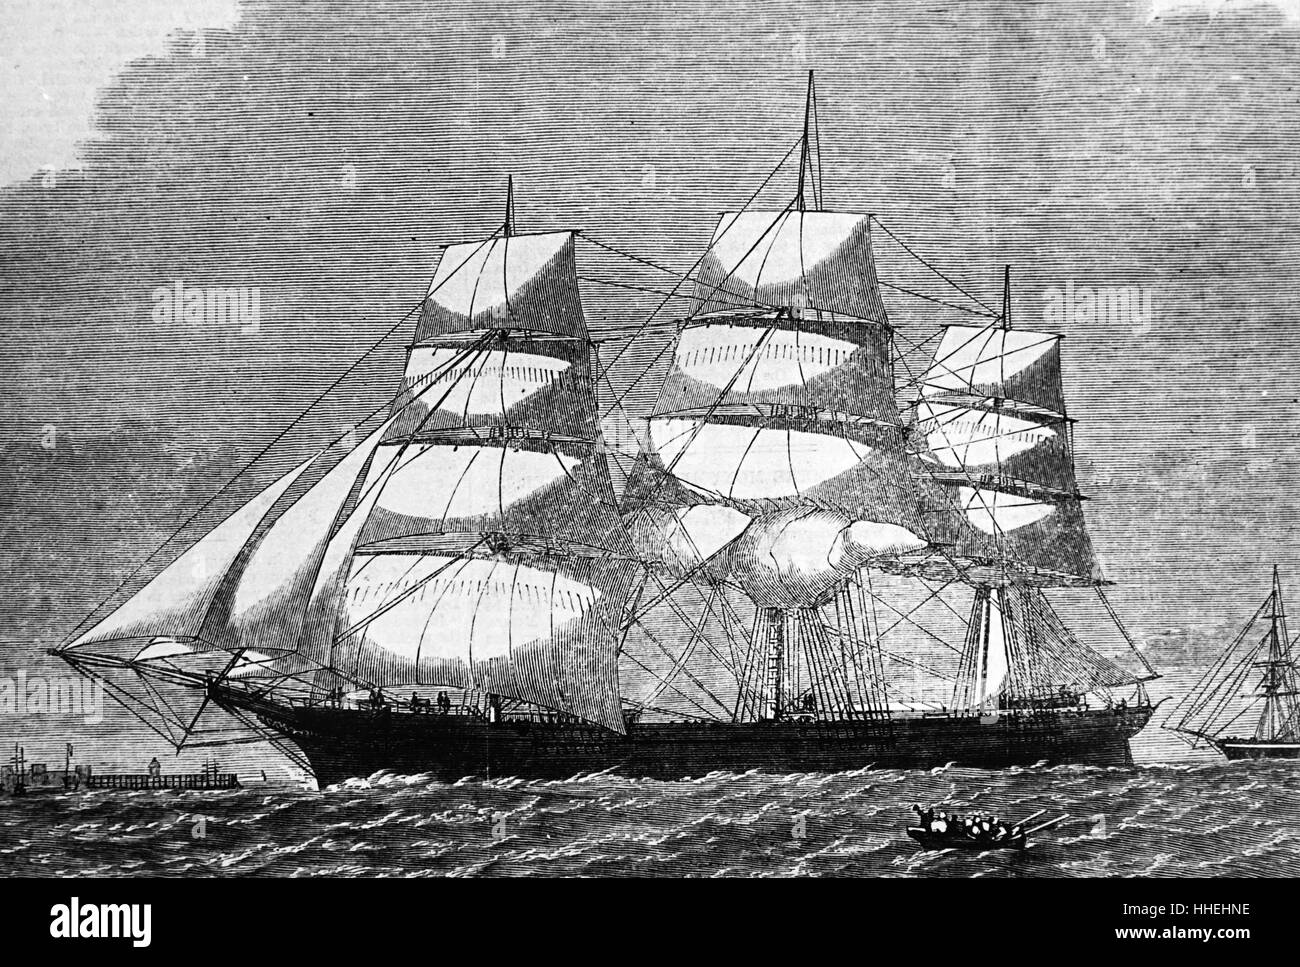 Portrait of the ship 'Glad Tidings' one of the first ships to bring a cargo to Liverpool after the re-opening of the American cotton trade. Dated 19th Century Stock Photo